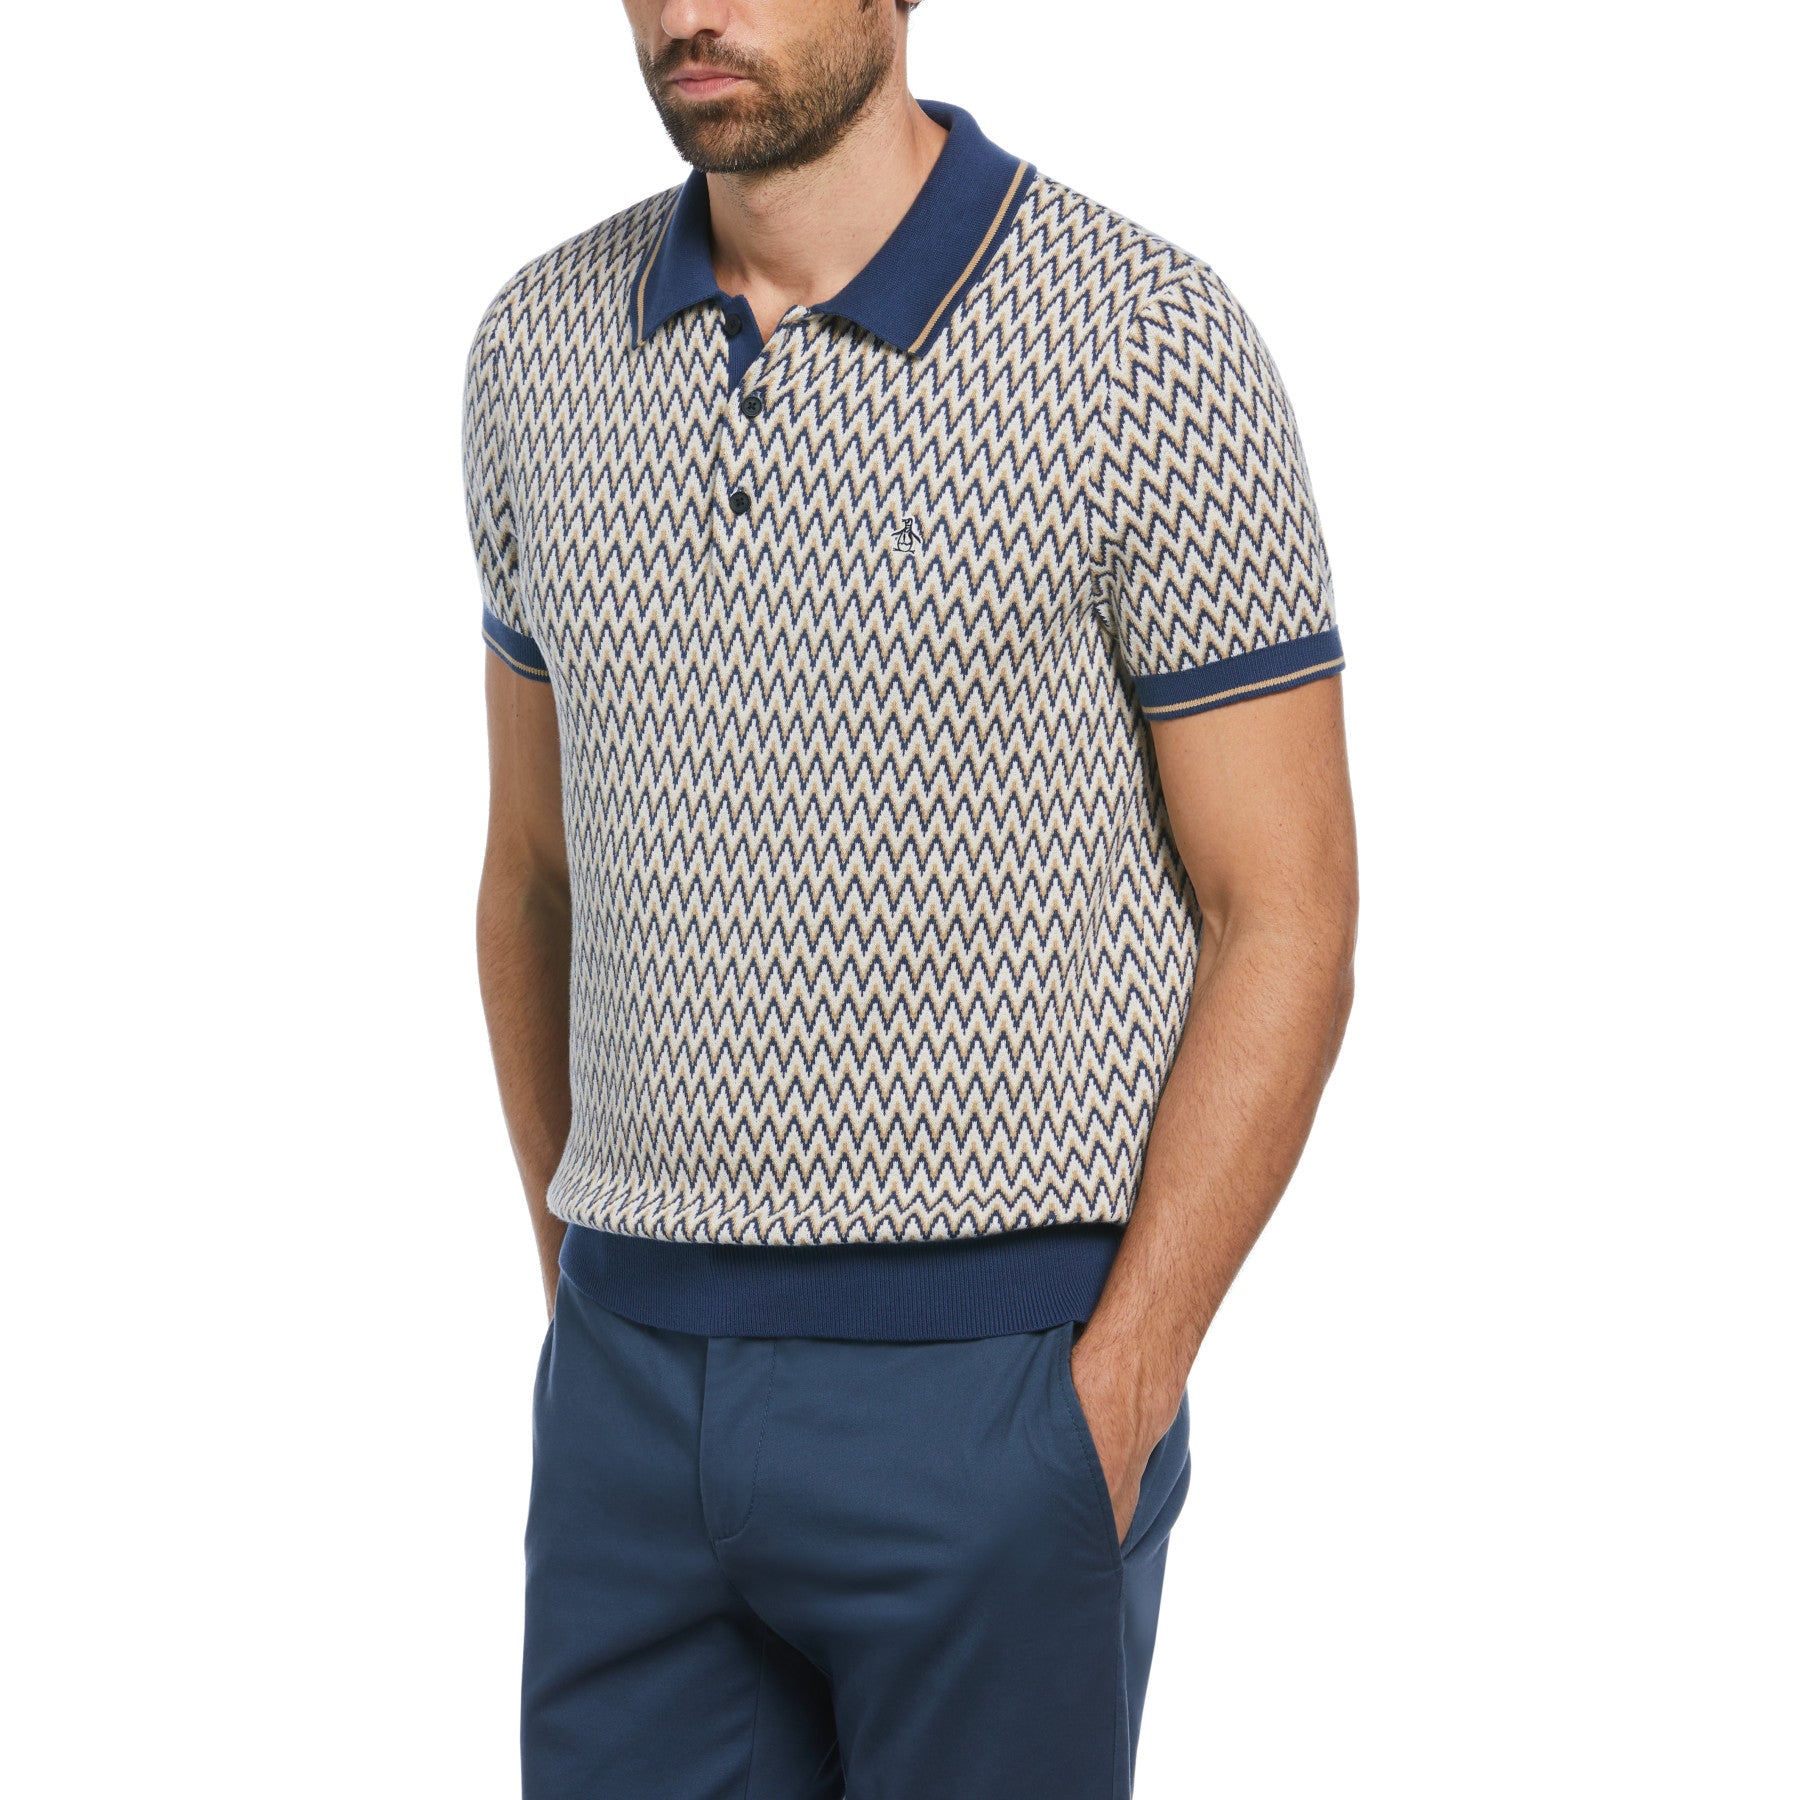 View Cotton Jacquard Sweater Polo Shirt In Birch information